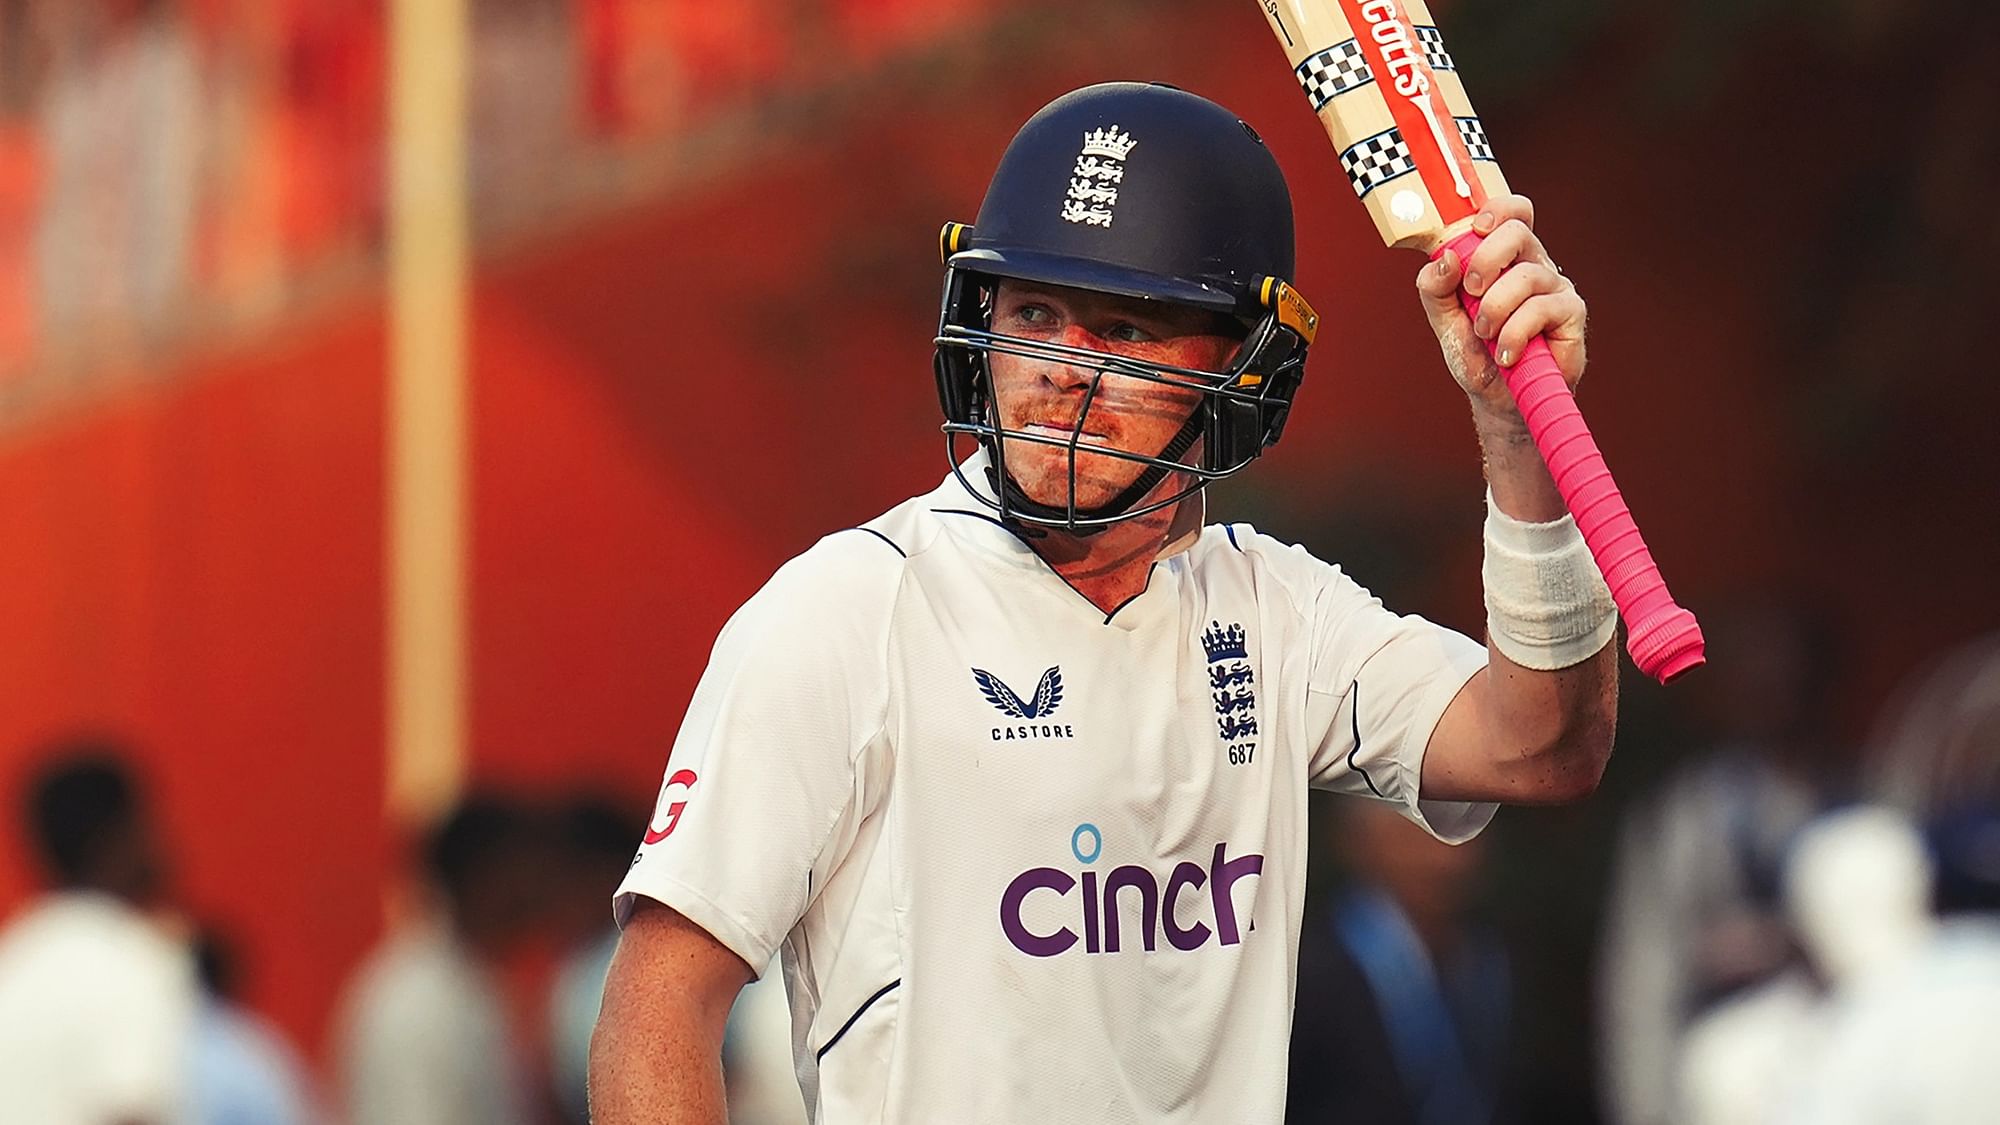 <div class="paragraphs"><p>Ind vs Eng, 1st Test Day 3: Ollie Pope scored 148* as England currently have a lead of 126 runs.</p></div>